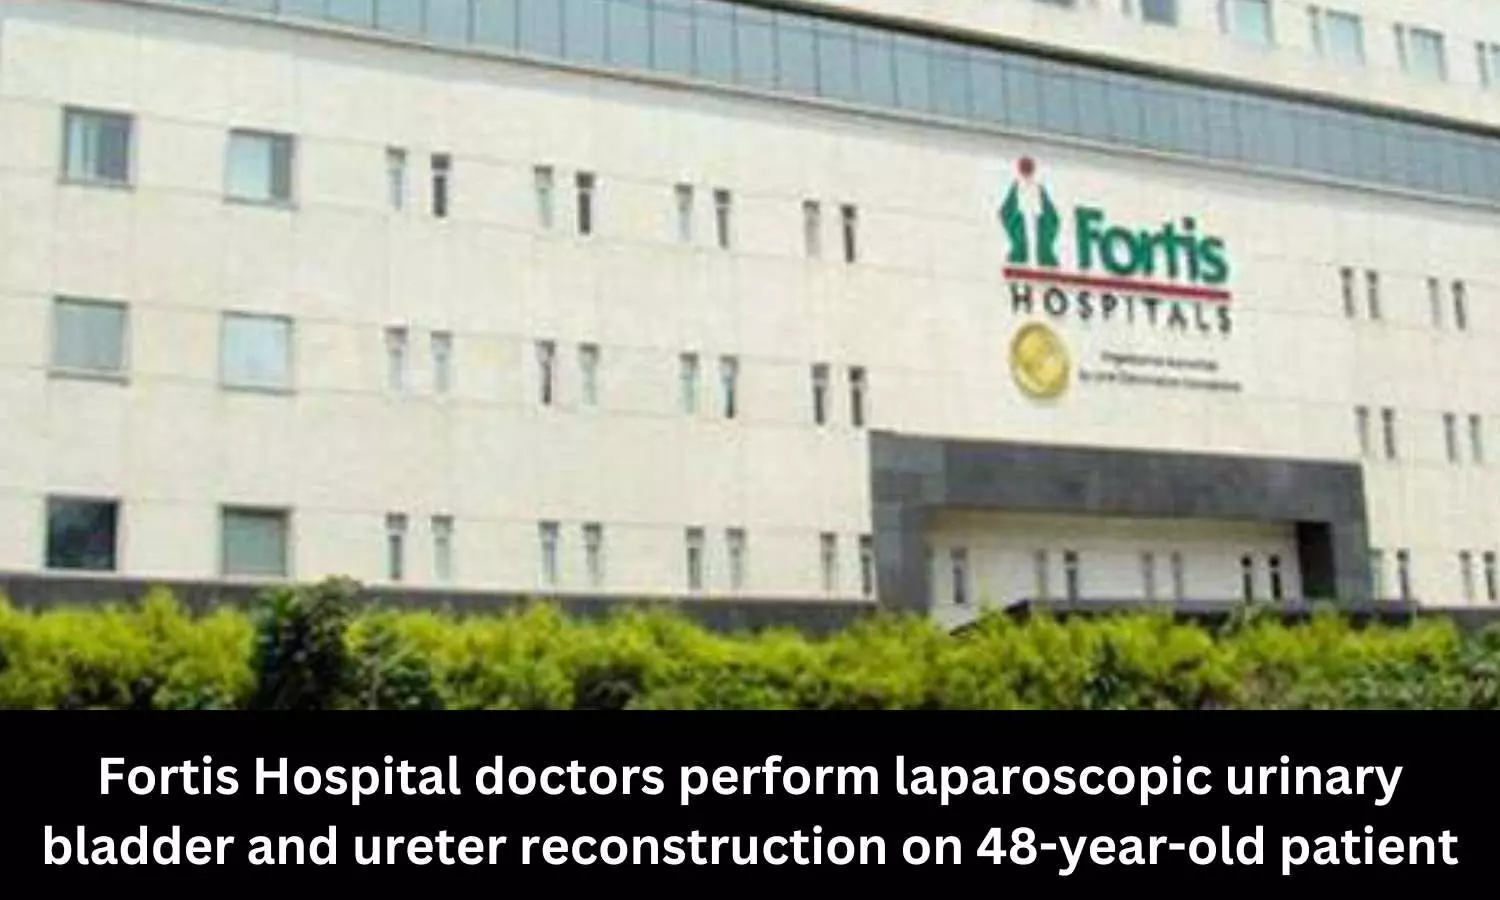 Doctors at Fortis Hospital perform laparoscopic urinary bladder and ureter reconstruction on 48-year-old patient